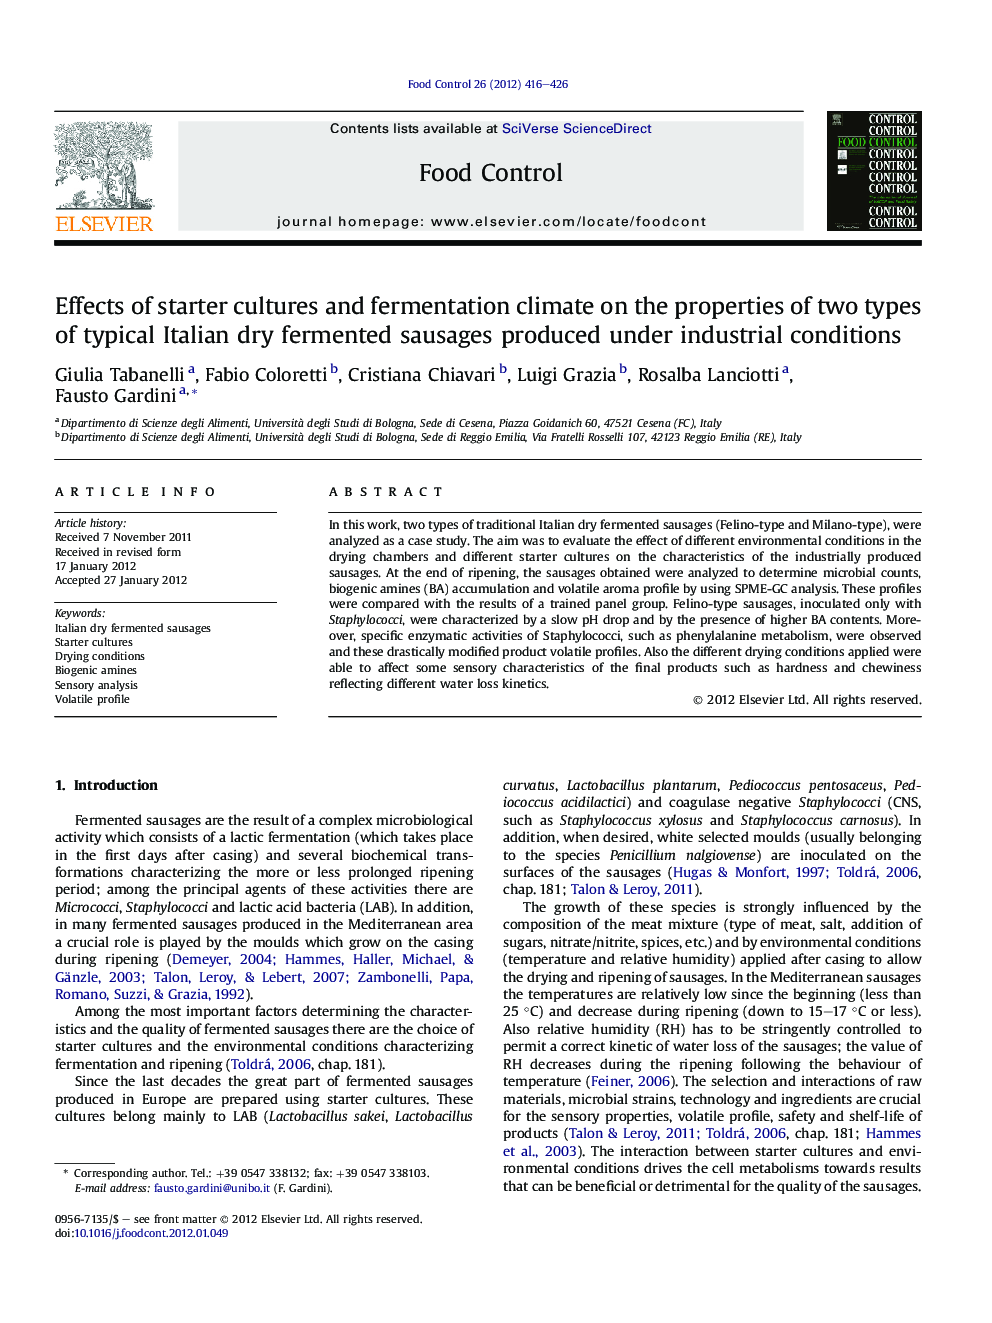 Effects of starter cultures and fermentation climate on the properties of two types of typical Italian dry fermented sausages produced under industrial conditions